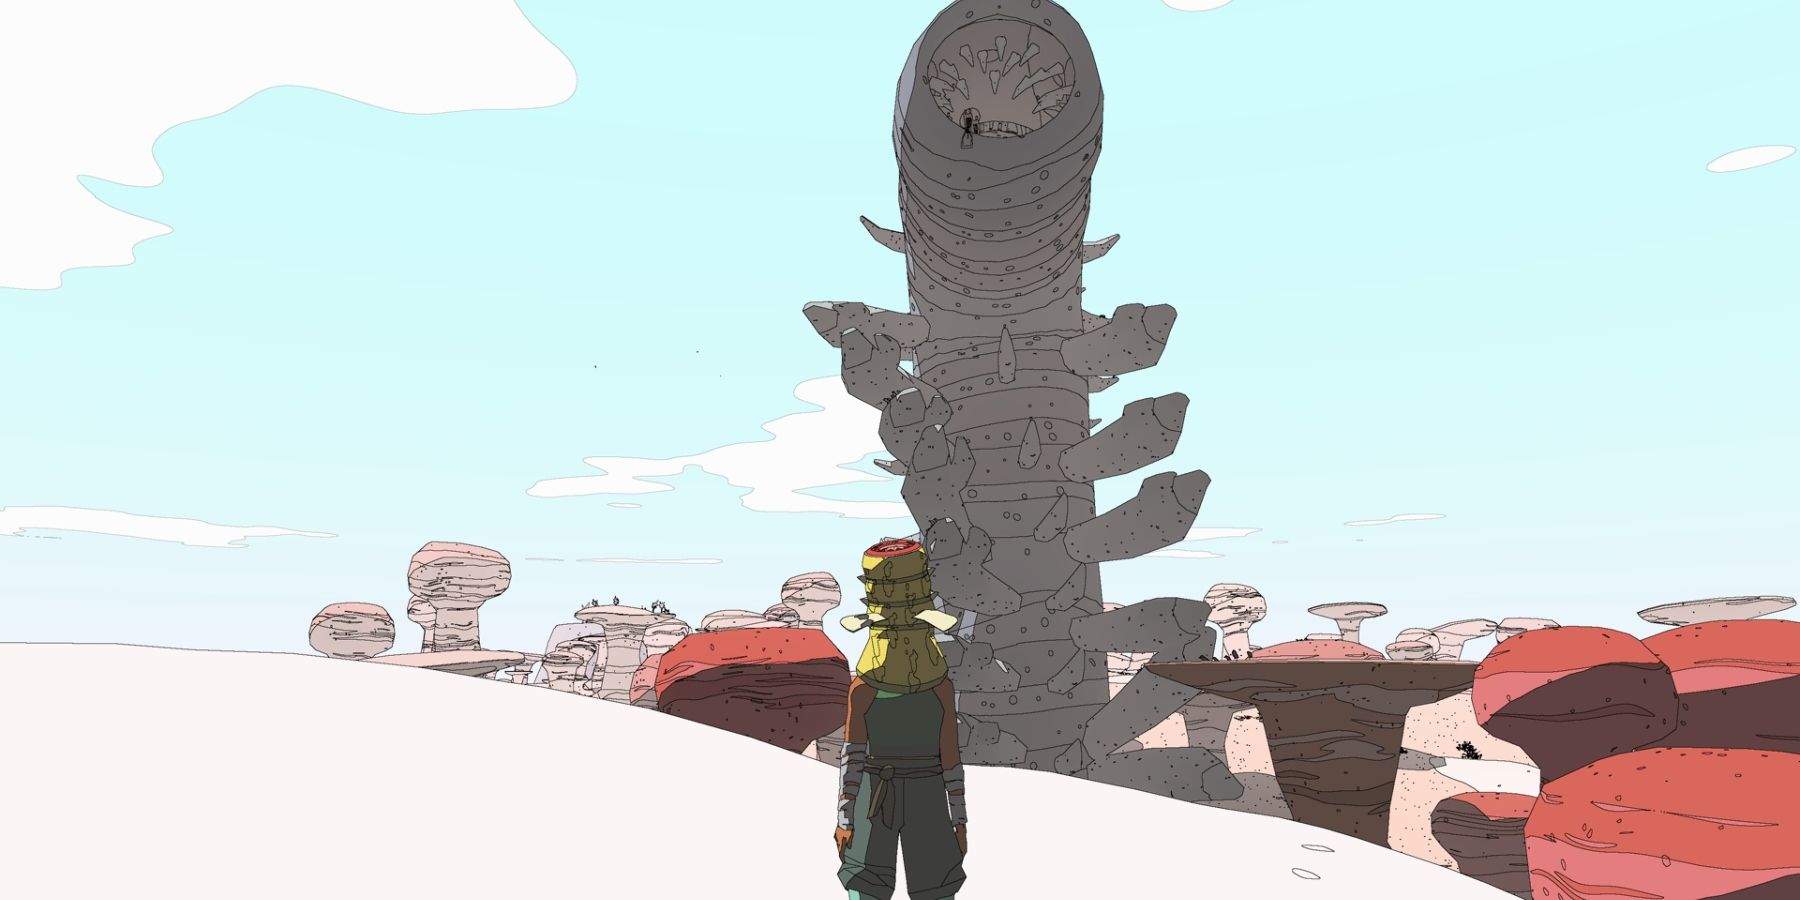 Sable in a tan, wormlike mask with spikes on its neck standing in front of a large, stone statue of a similar looking worm